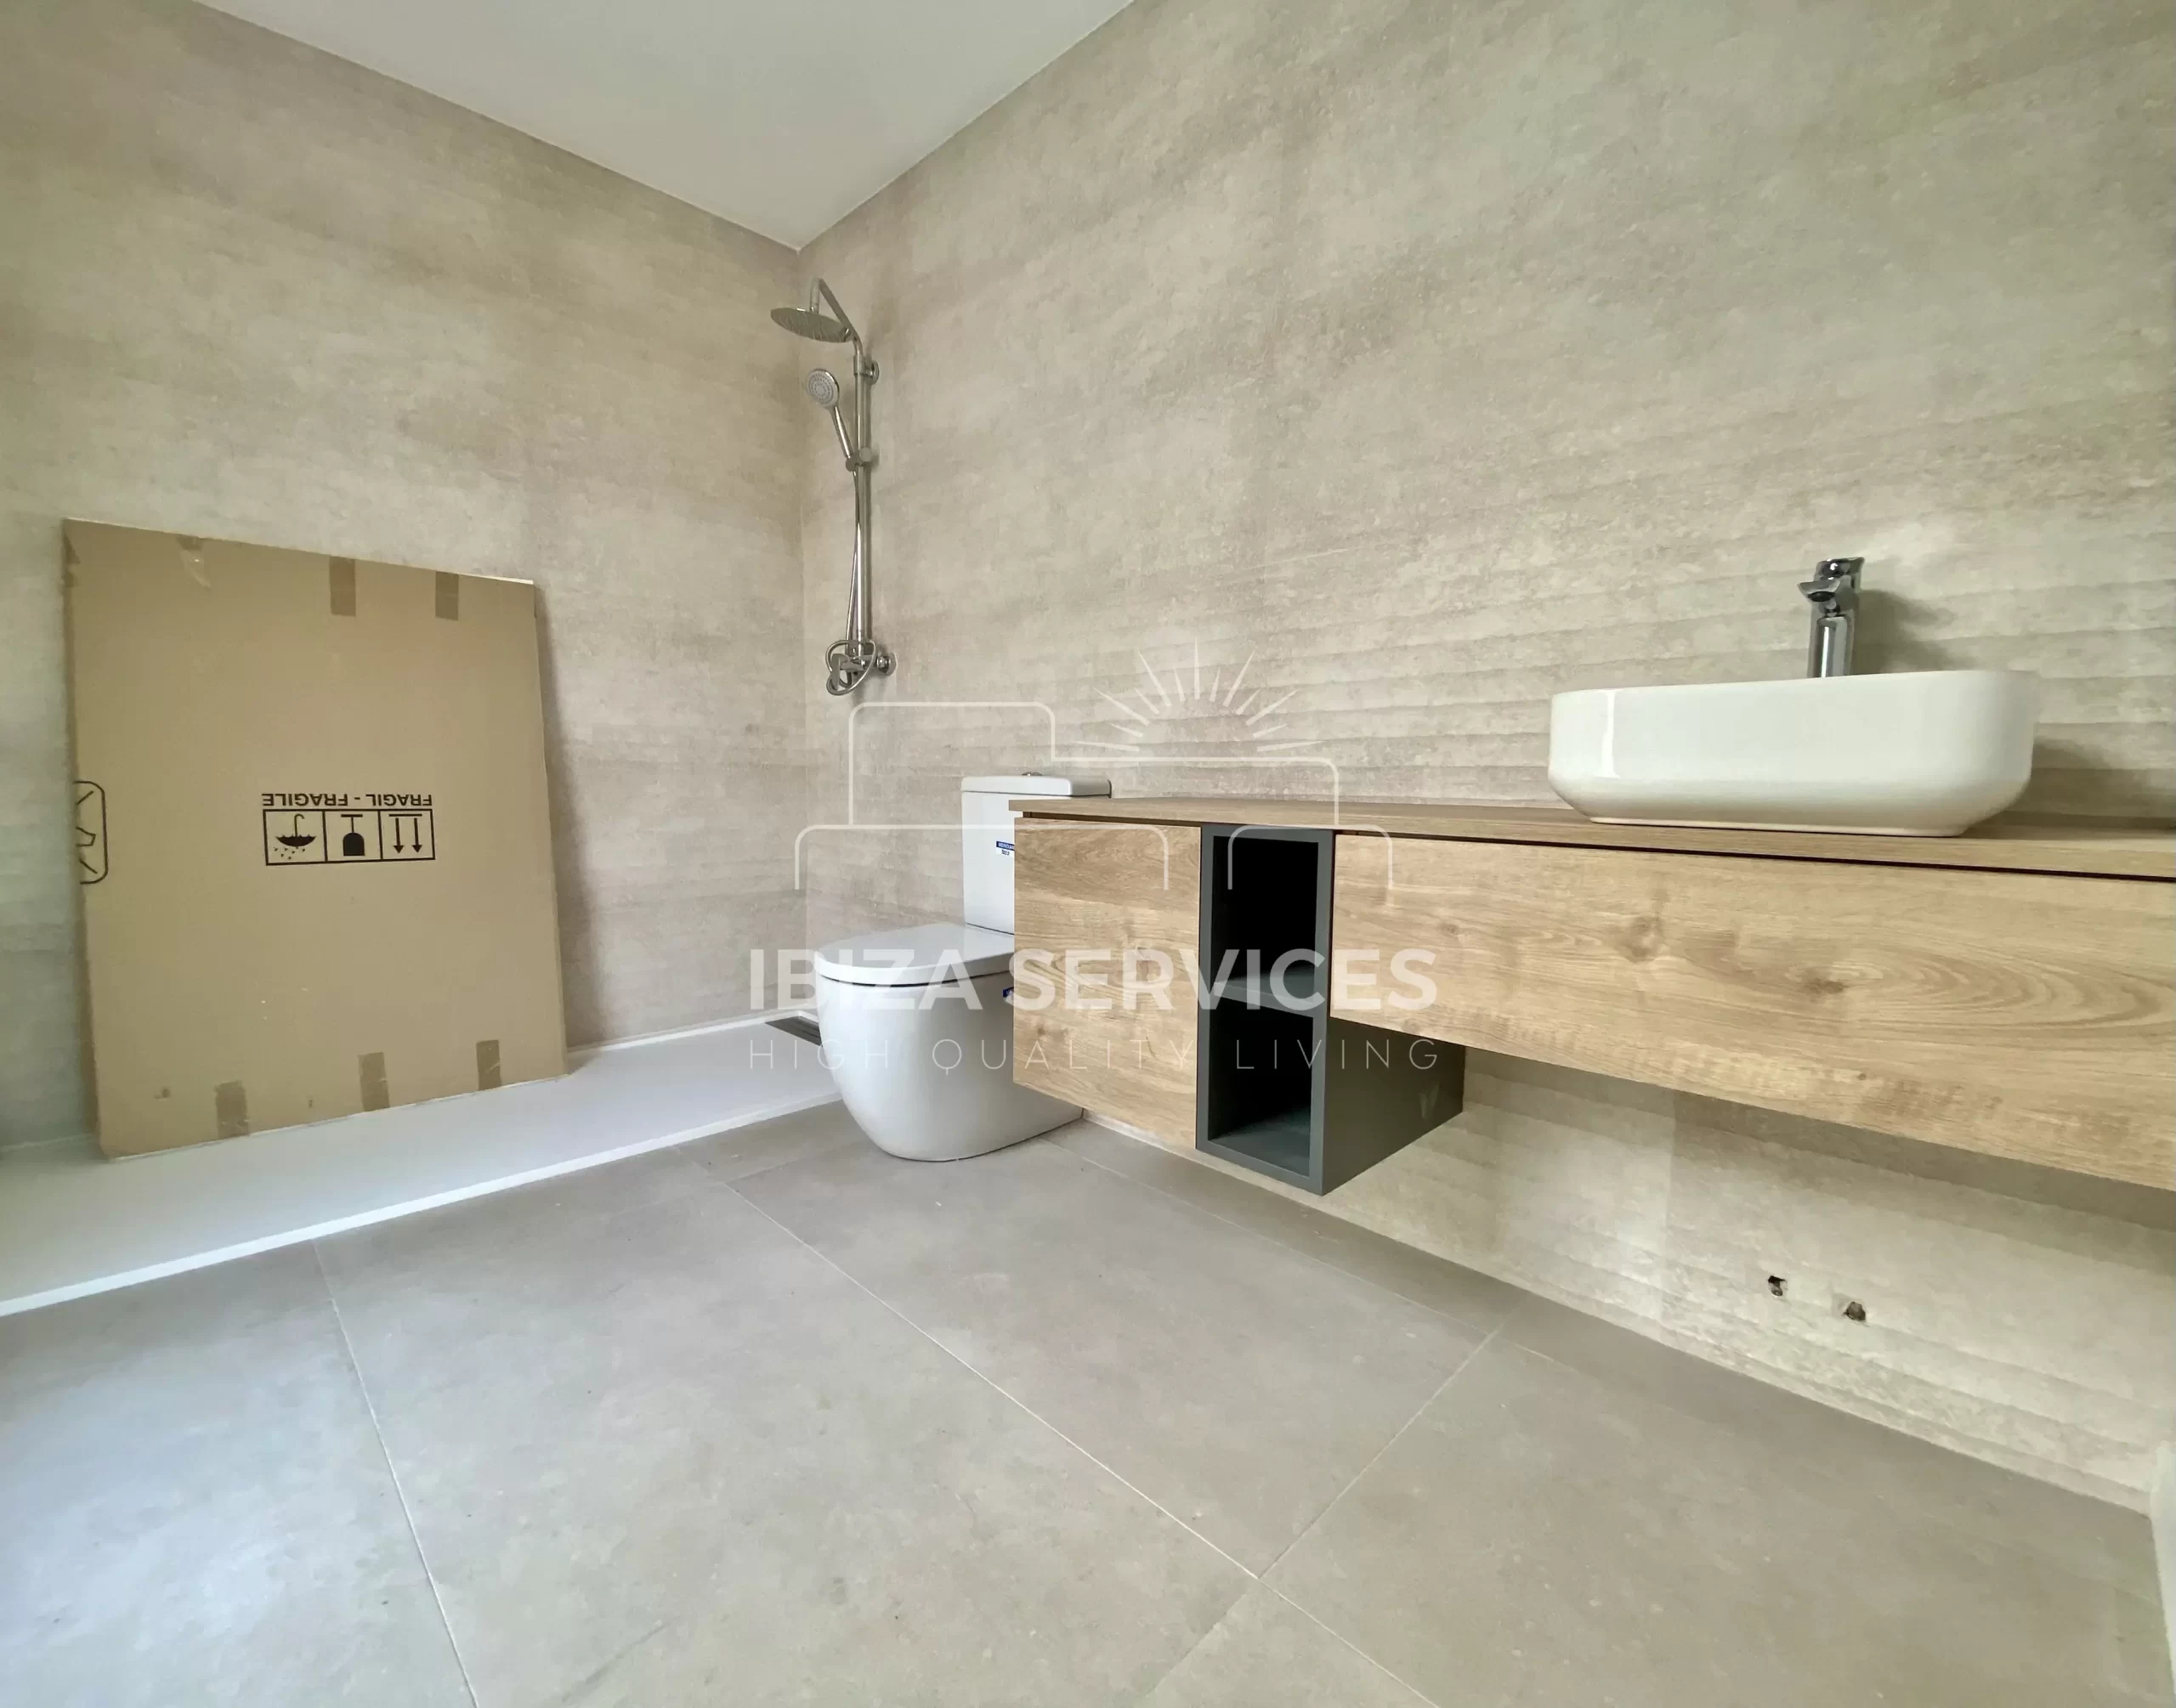 Modern Detached House For Sale in the Heart of San Josep Village.